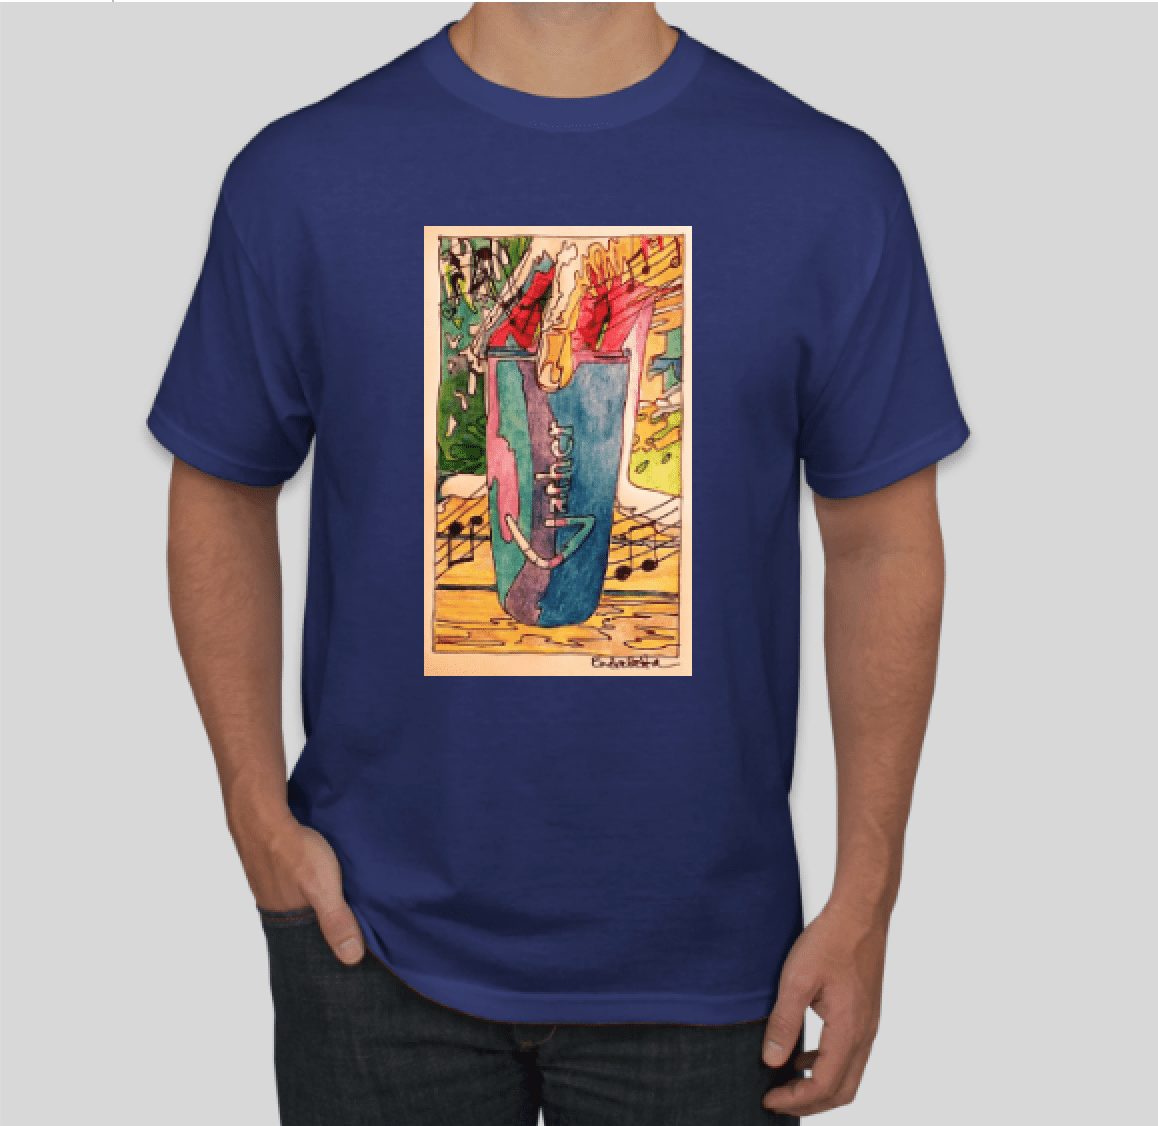 A royal blue t-shirt featuring a rectangular graphic print with vibrant, abstract artwork that includes a figure and various colorful elements.